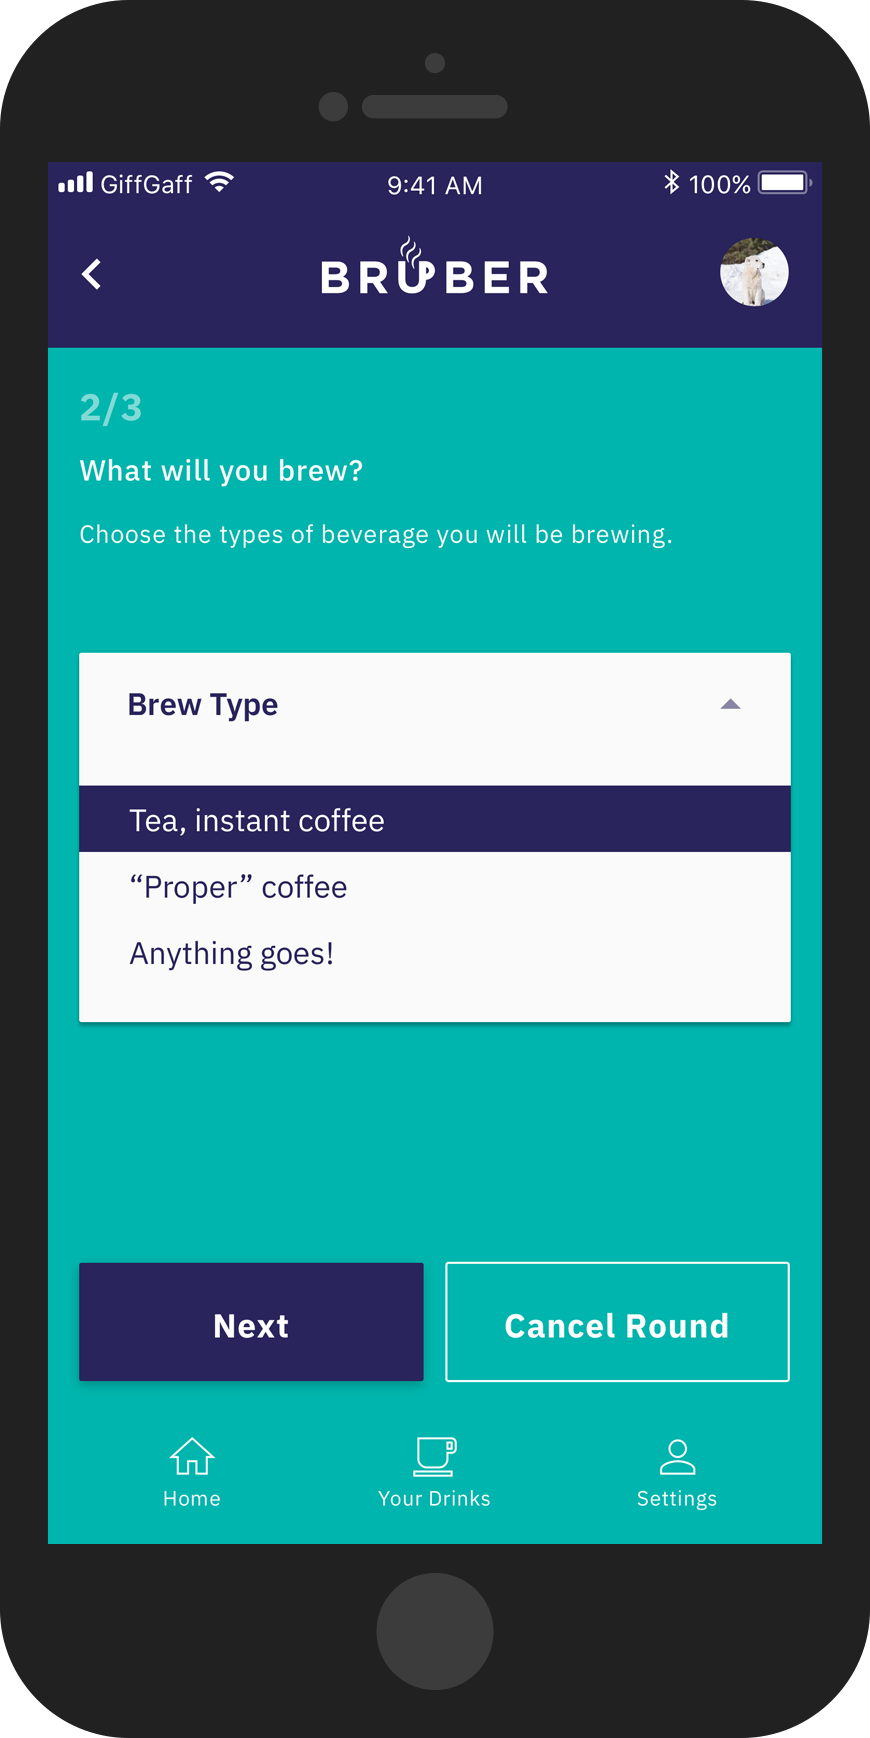 bruber-what-will-you-brew